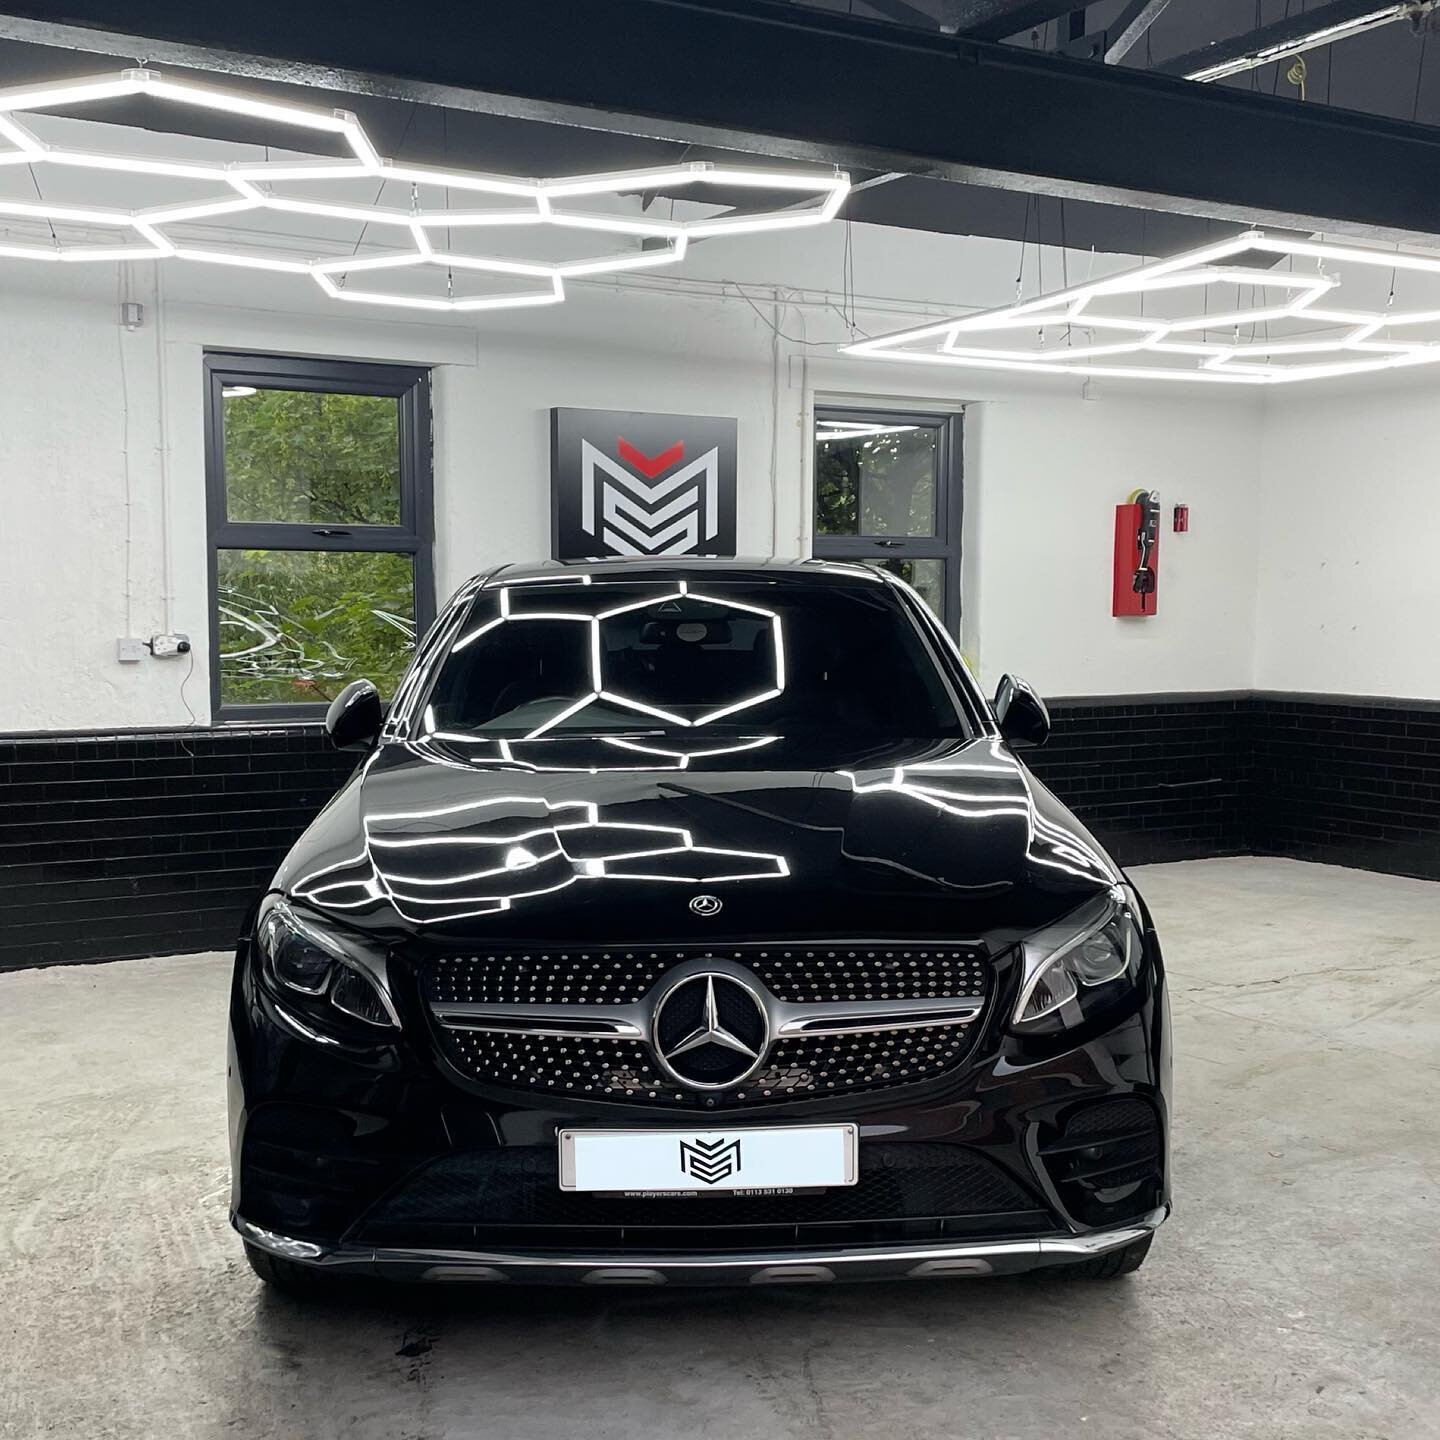 ✨MSDETAILINGUK✨
Mercedes in for our maintenance detail!!! 

EXTERIOR 
* PRE WASHED (BREAKING DOWN BUILT UP DIRT)
* SNOWFOAM PLUS 2 BUCKED METHOD (WE WASH THE SAFE WAY)
* ALLOYS CLEANED IN DETAIL 
* TYRES GEL DRESSED 
* EXTERIOR GLASS CLEANED 
* DETAI